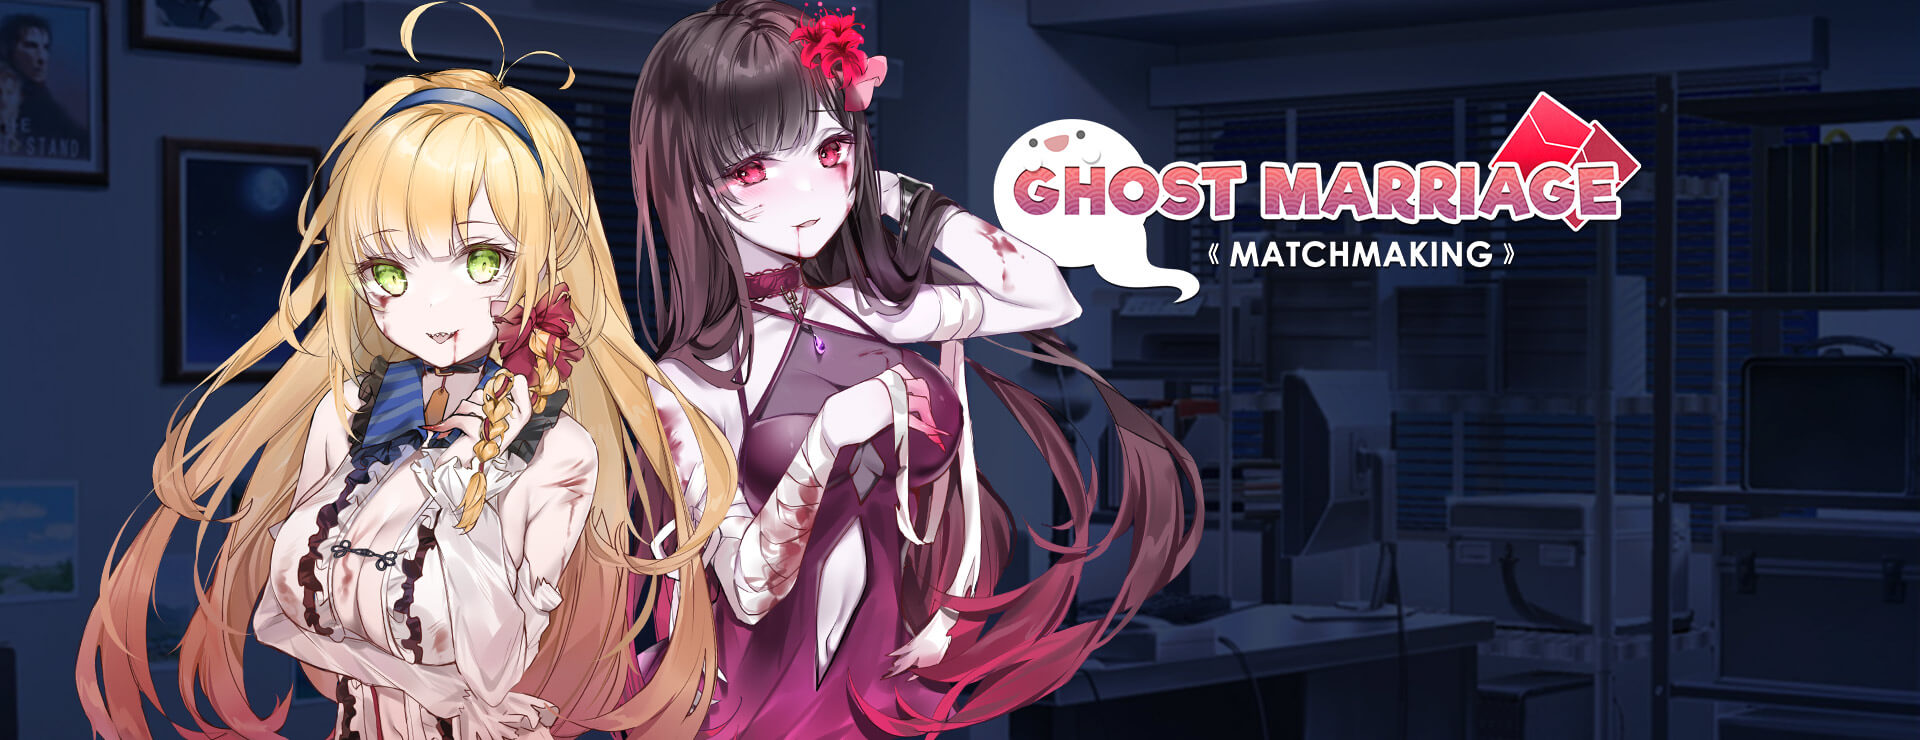 Ghost Marriage Matchmaking - 角色扮演 遊戲